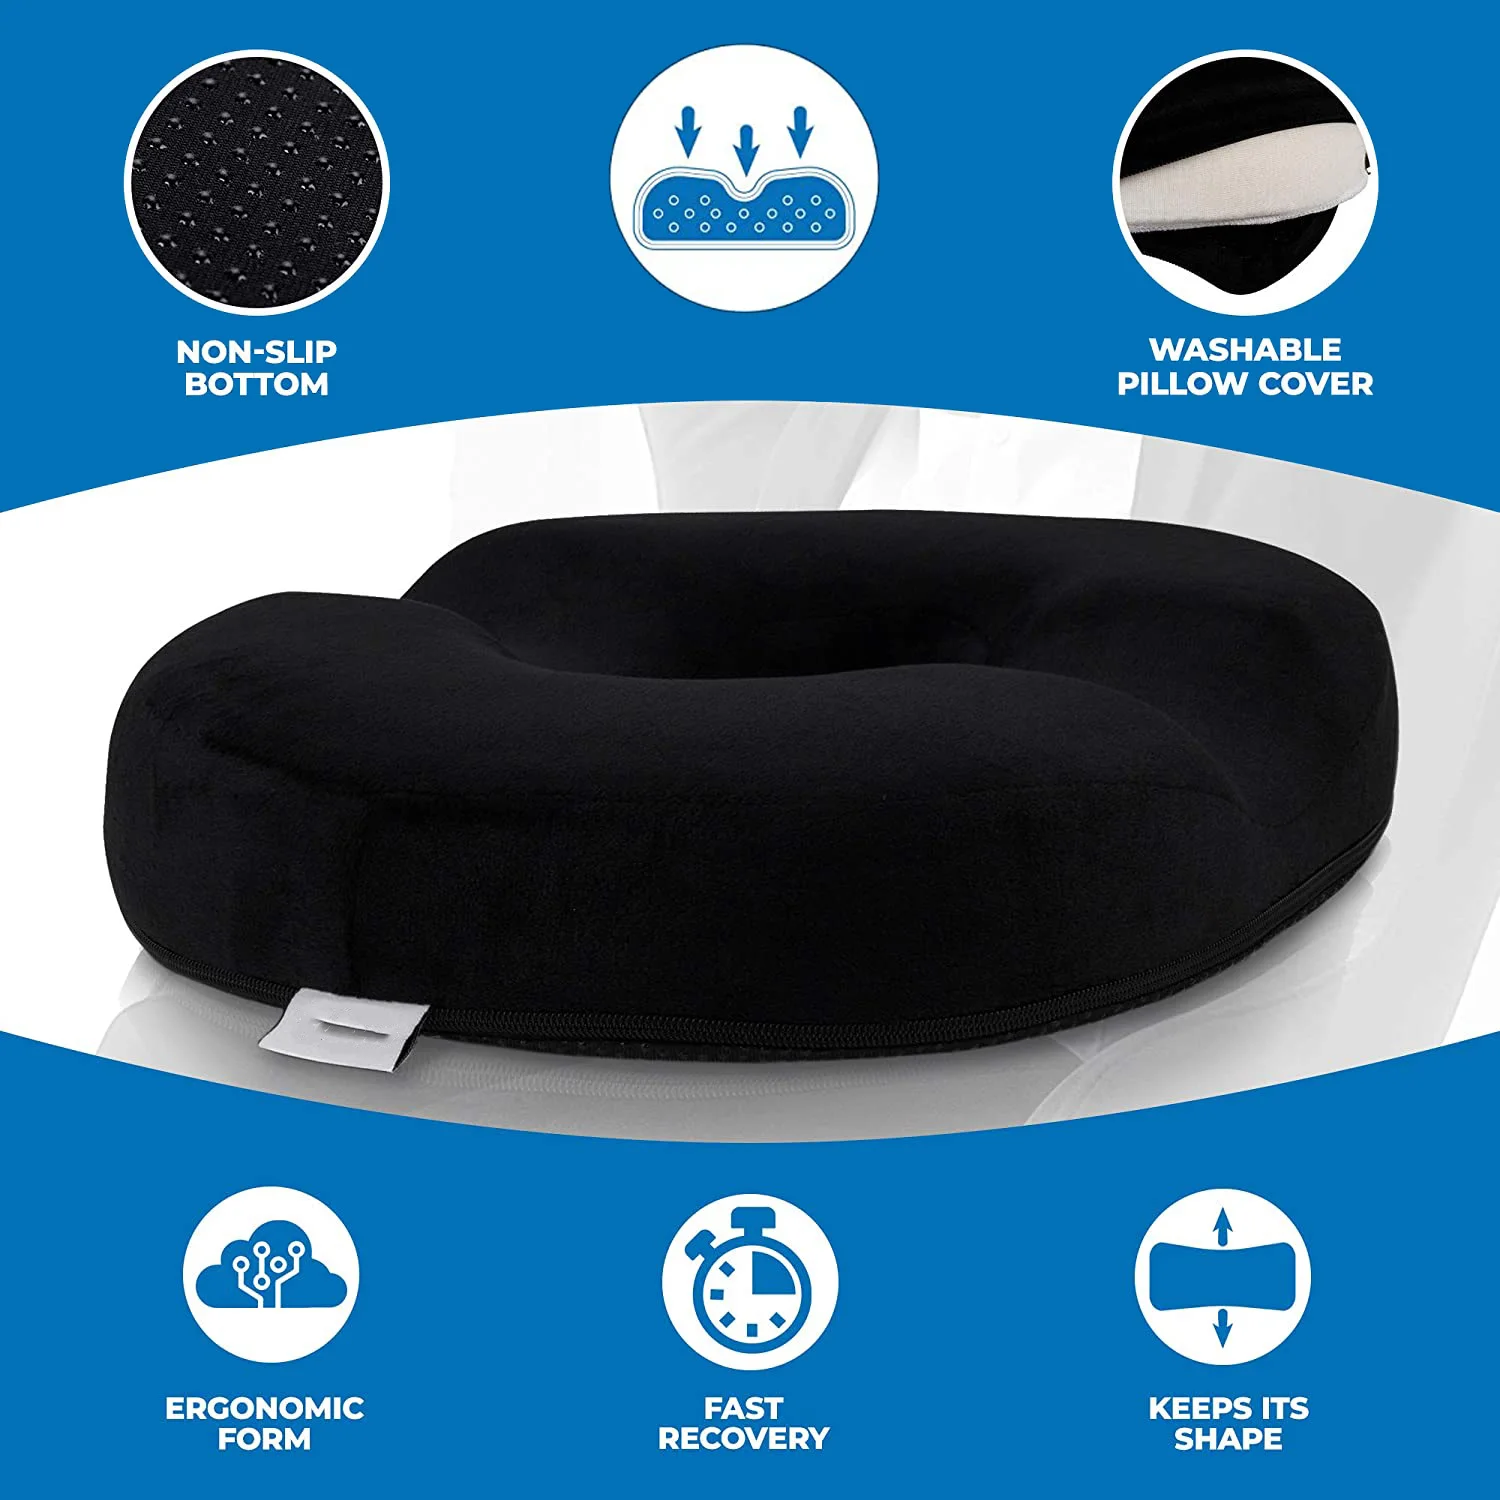 Donut Pillow for Tailbone Pain-100% Memory Foam Hemorrhoids Pain Relief  Office Chair Cushion for Back, Sciatica, Orthopedic Surgery Recovery